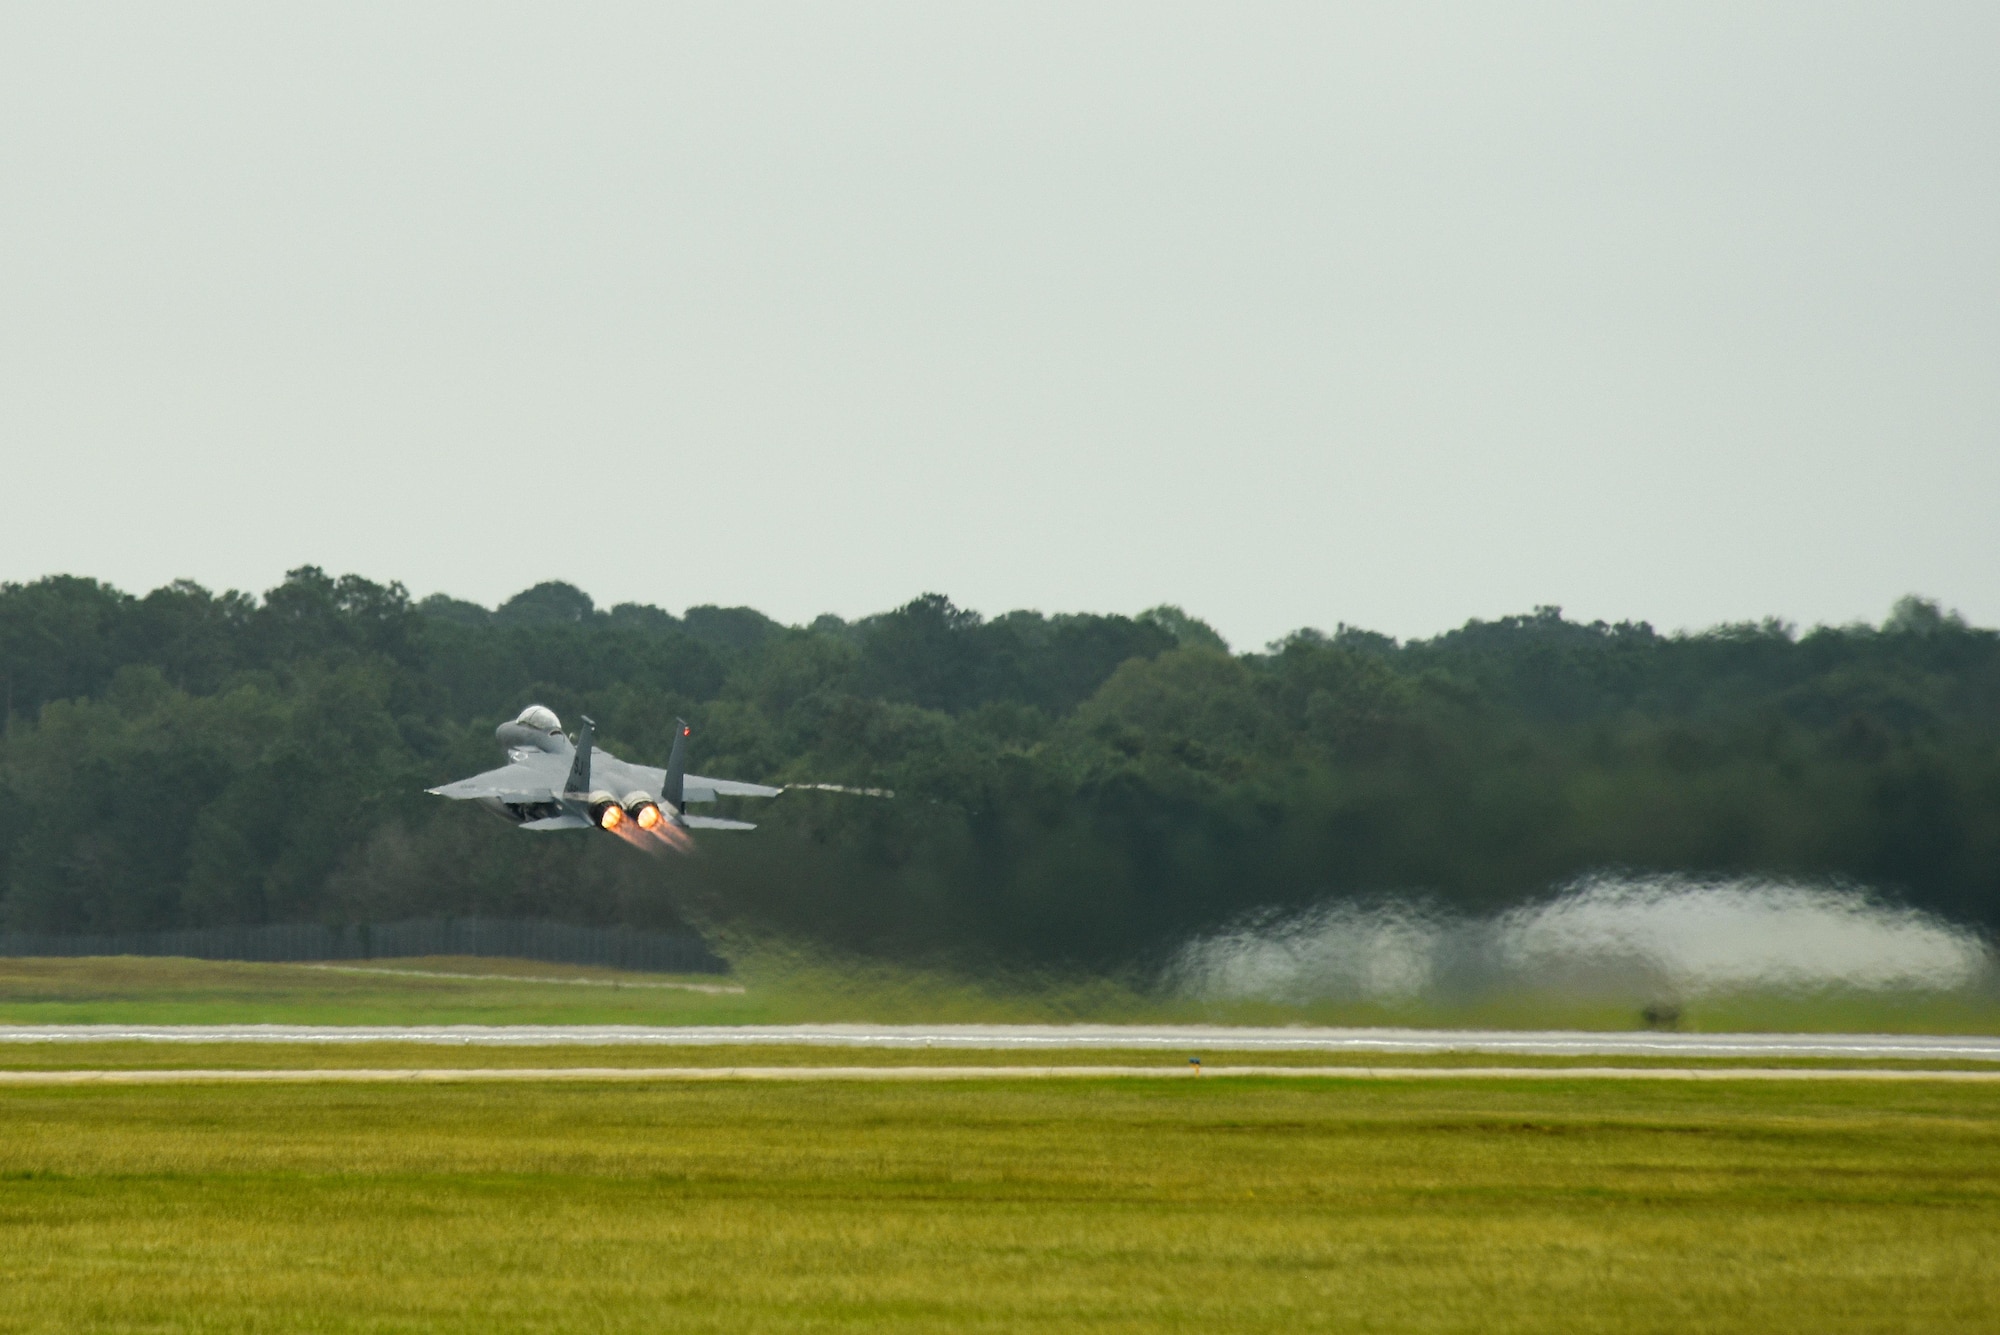 An F-15E Strike Eagle from the 335th Fighter Squadron takes off as a precautionary measure to avoid severe weather associated with Hurricane Matthew, Oct. 6, 2016, at Seymour Johnson Air Force Base, North Carolina. More than 40 F-15E Strike Eagles were repositioned to Barksdale Air Force Base, Louisiana. (U.S. Air Force photo by Airman Shawna L. Keyes)